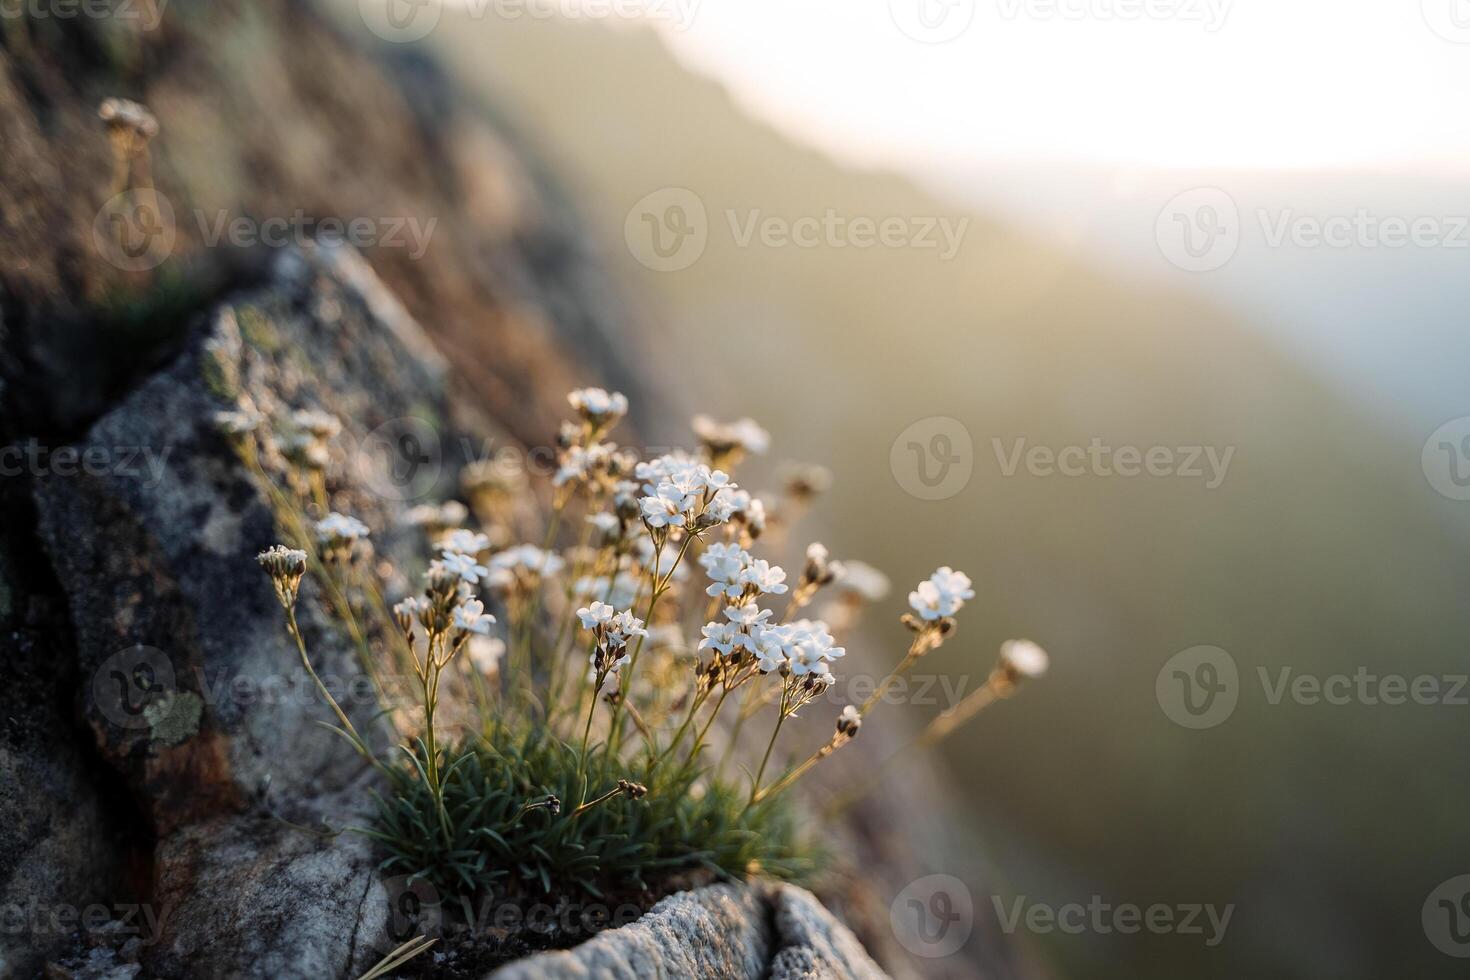 A close shot of a small gypsophila bush in the rays of the sun growing on the rock. The little white flowers had already bloomed. photo